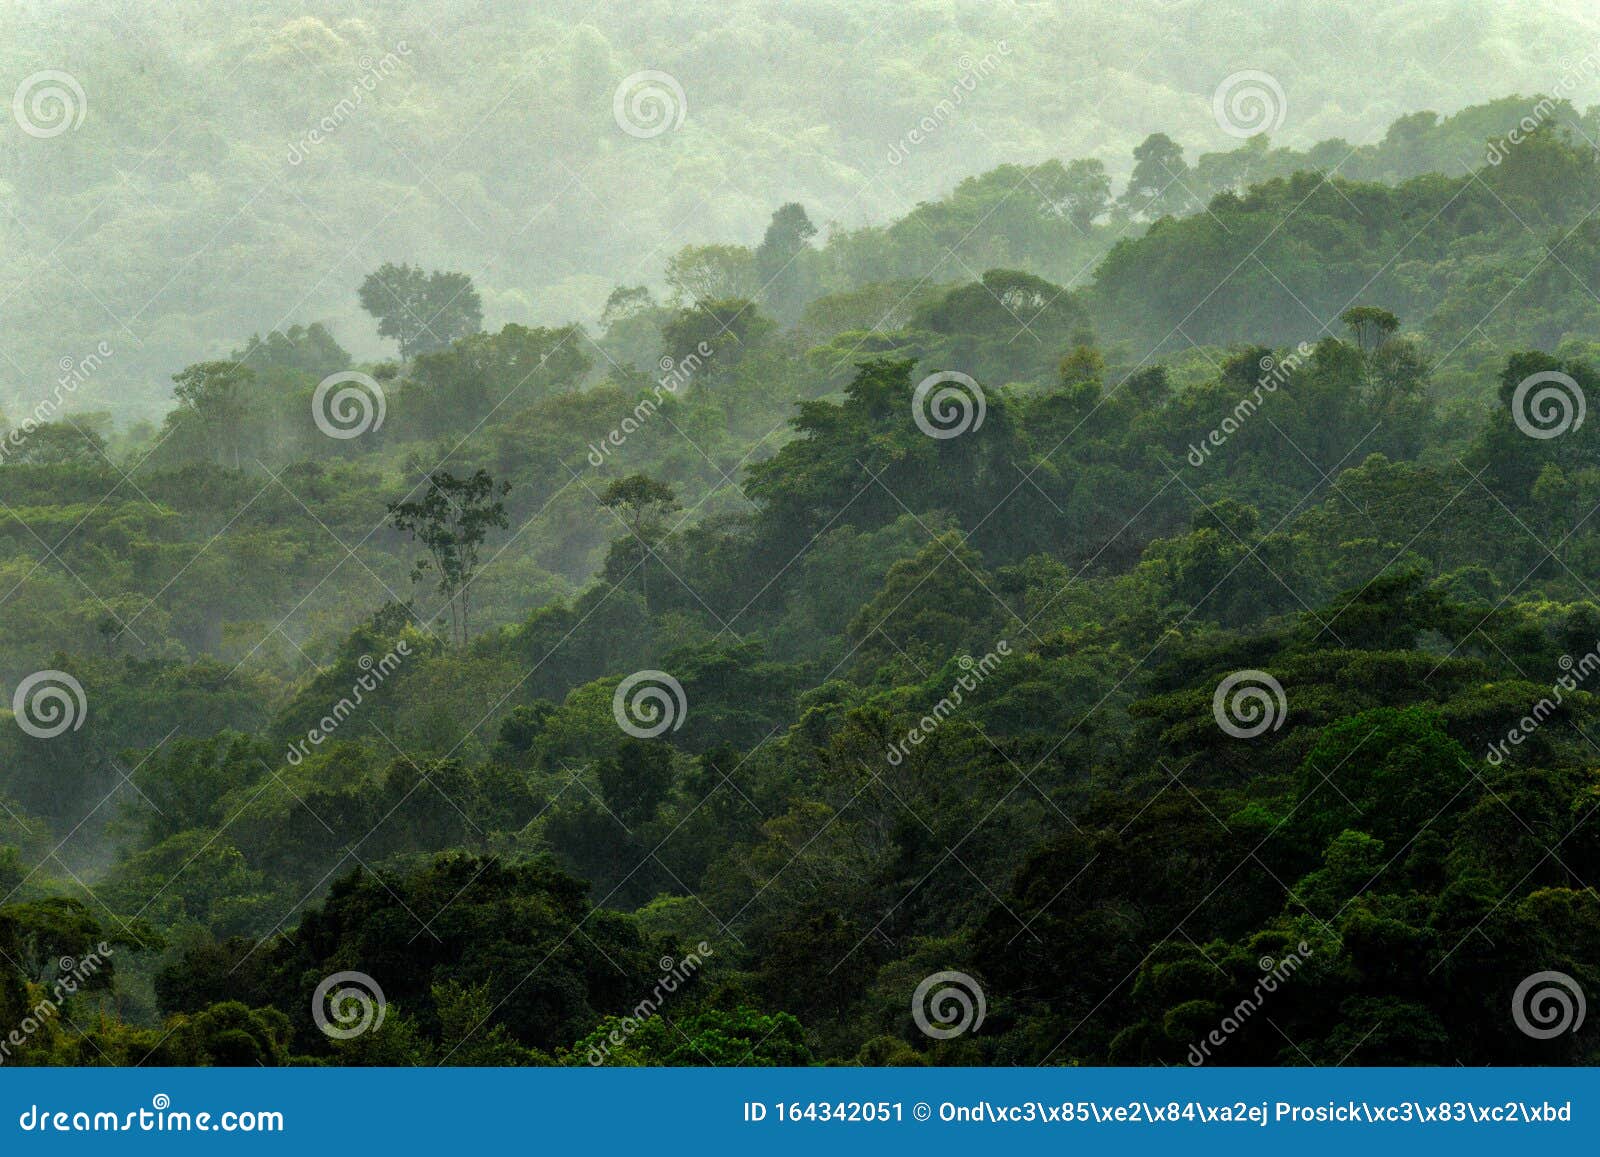 Tropical Forest during Rainy Day. Green Jungle Landscape with Rain and Fog  in Santa Marta, Colombia Stock Image - Image of national, foliage: 164342051